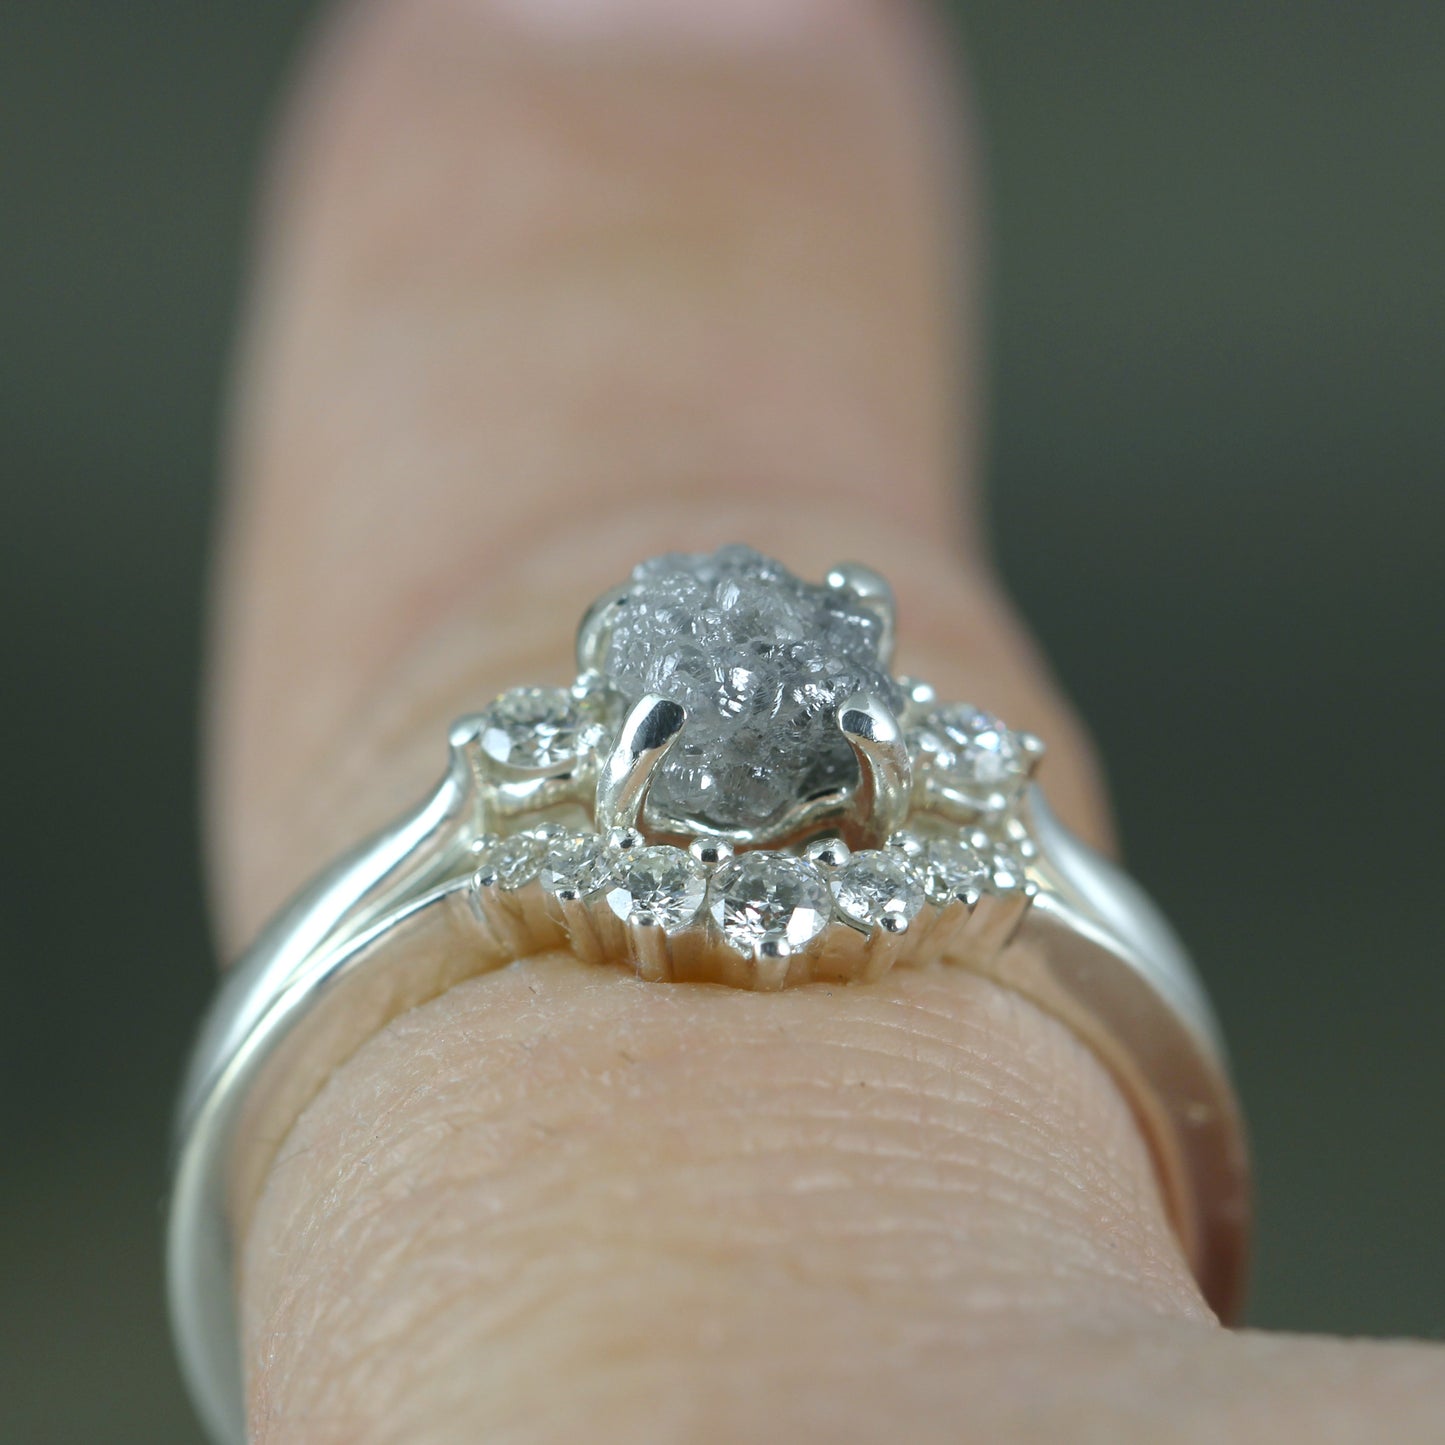 Salt & Pepper Rough Uncut Diamond Ring with Faceted Diamond Accents